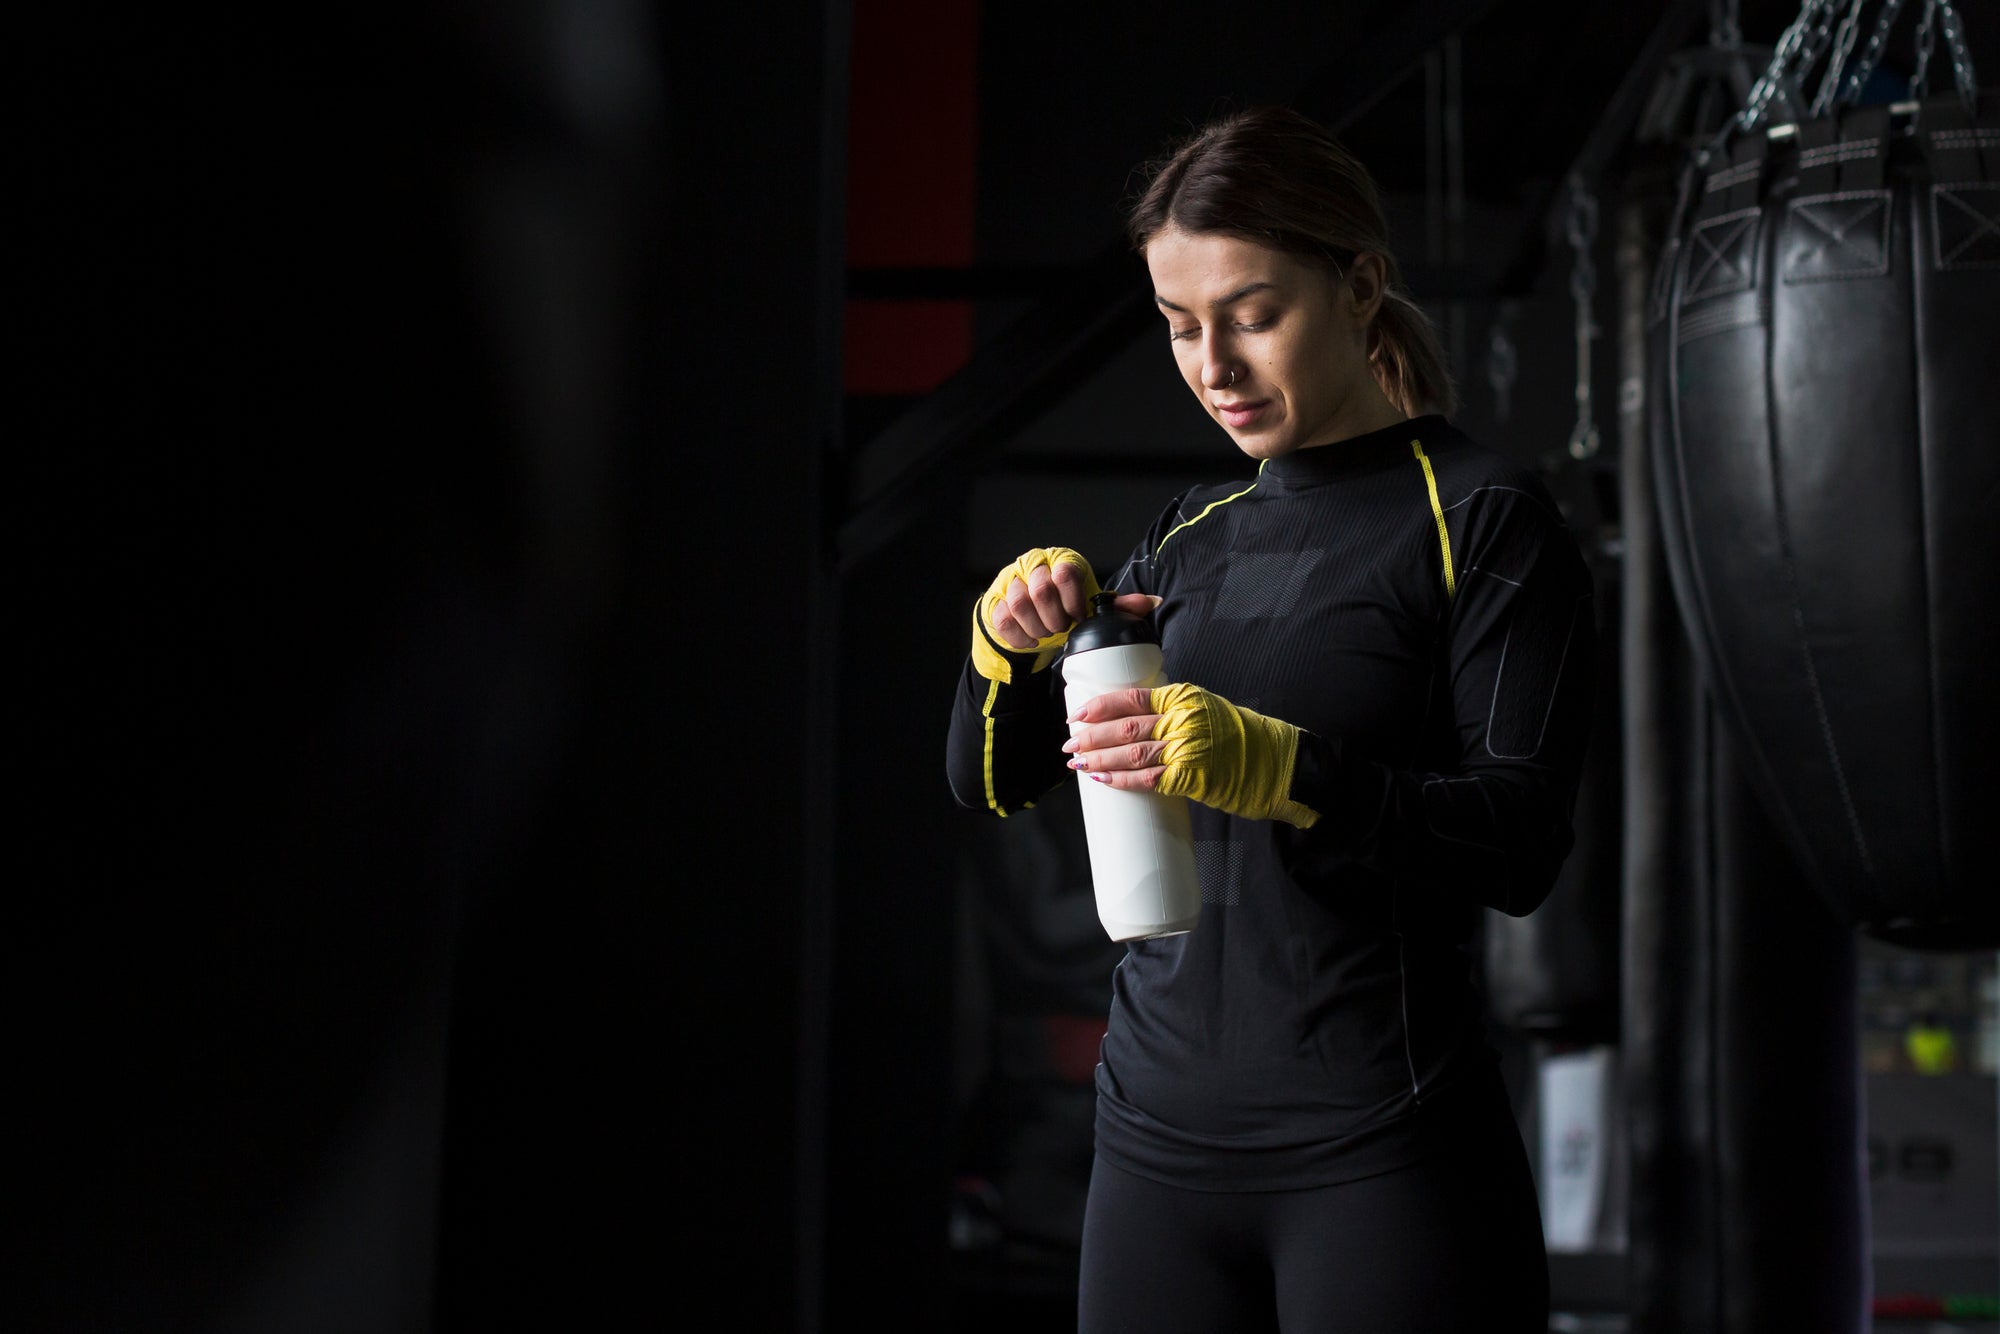 The Supplements You Need to Add to Your Workout